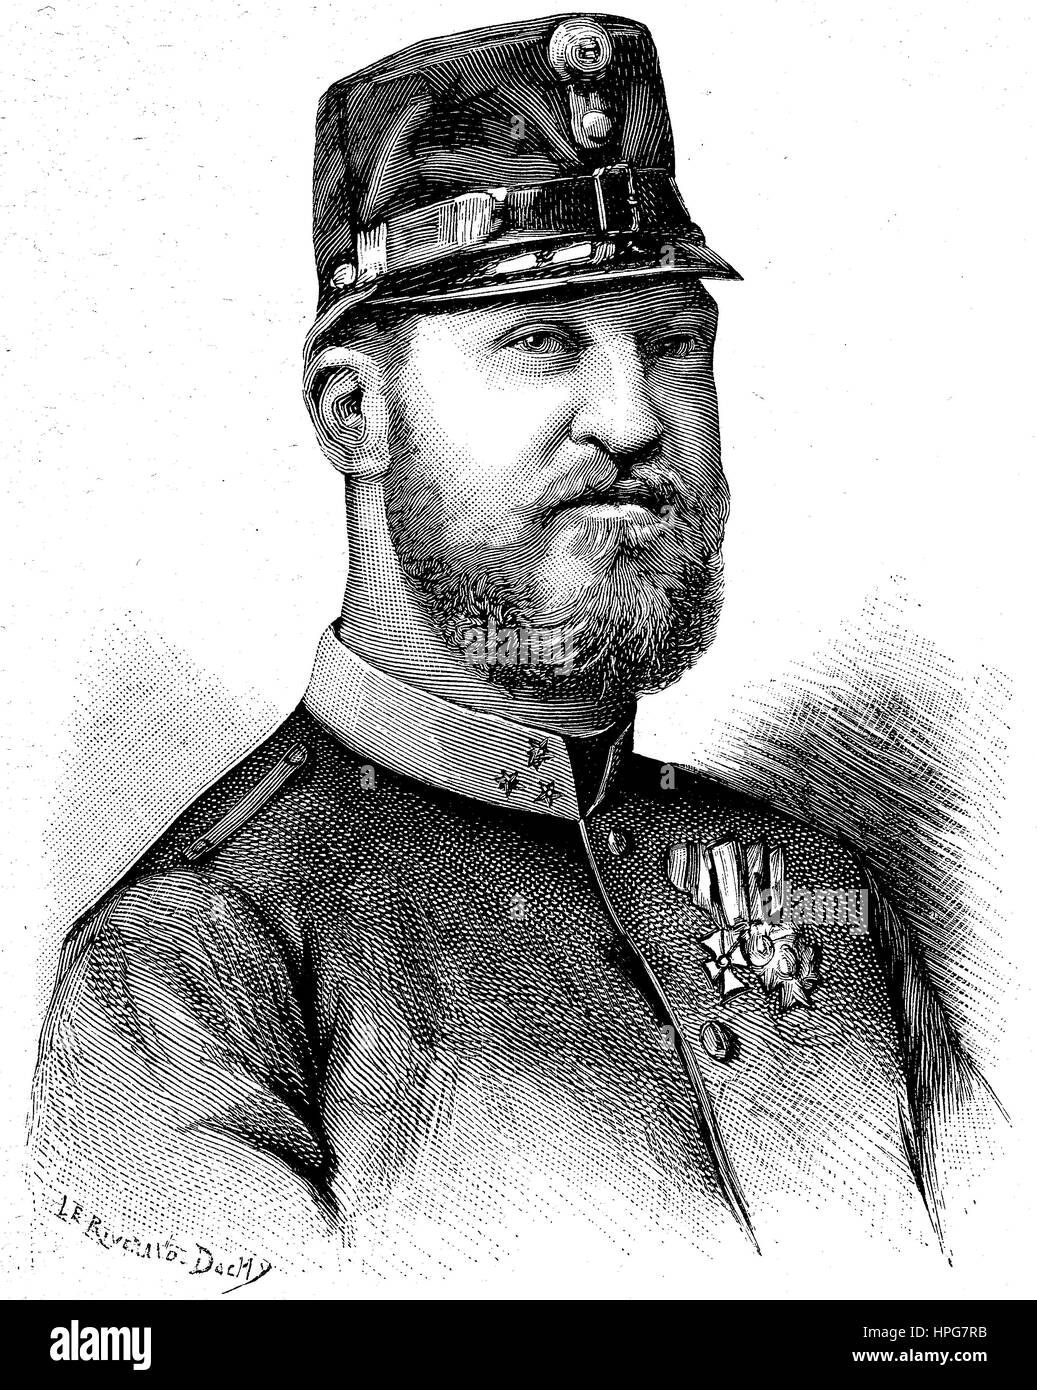 Ernst August, Crown Prince of Hannover, 3rd Duke of Cumberland and Teviotdale, Ernest Augustus William Adolphus George Frederick, 1845 - 1923, digital improved reproduction of a woodcut from the year 1885 Stock Photo